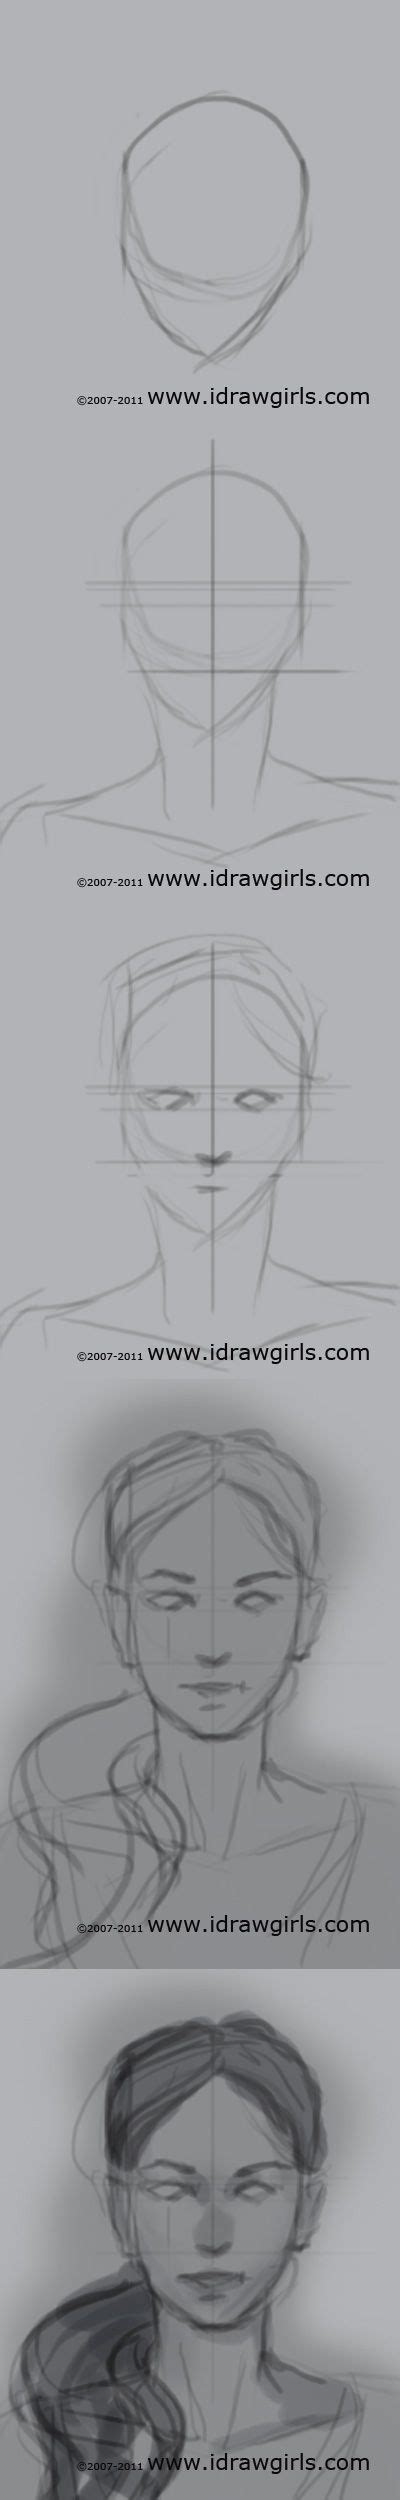 drawing portrait tutorial front view  drawingportraits drawings